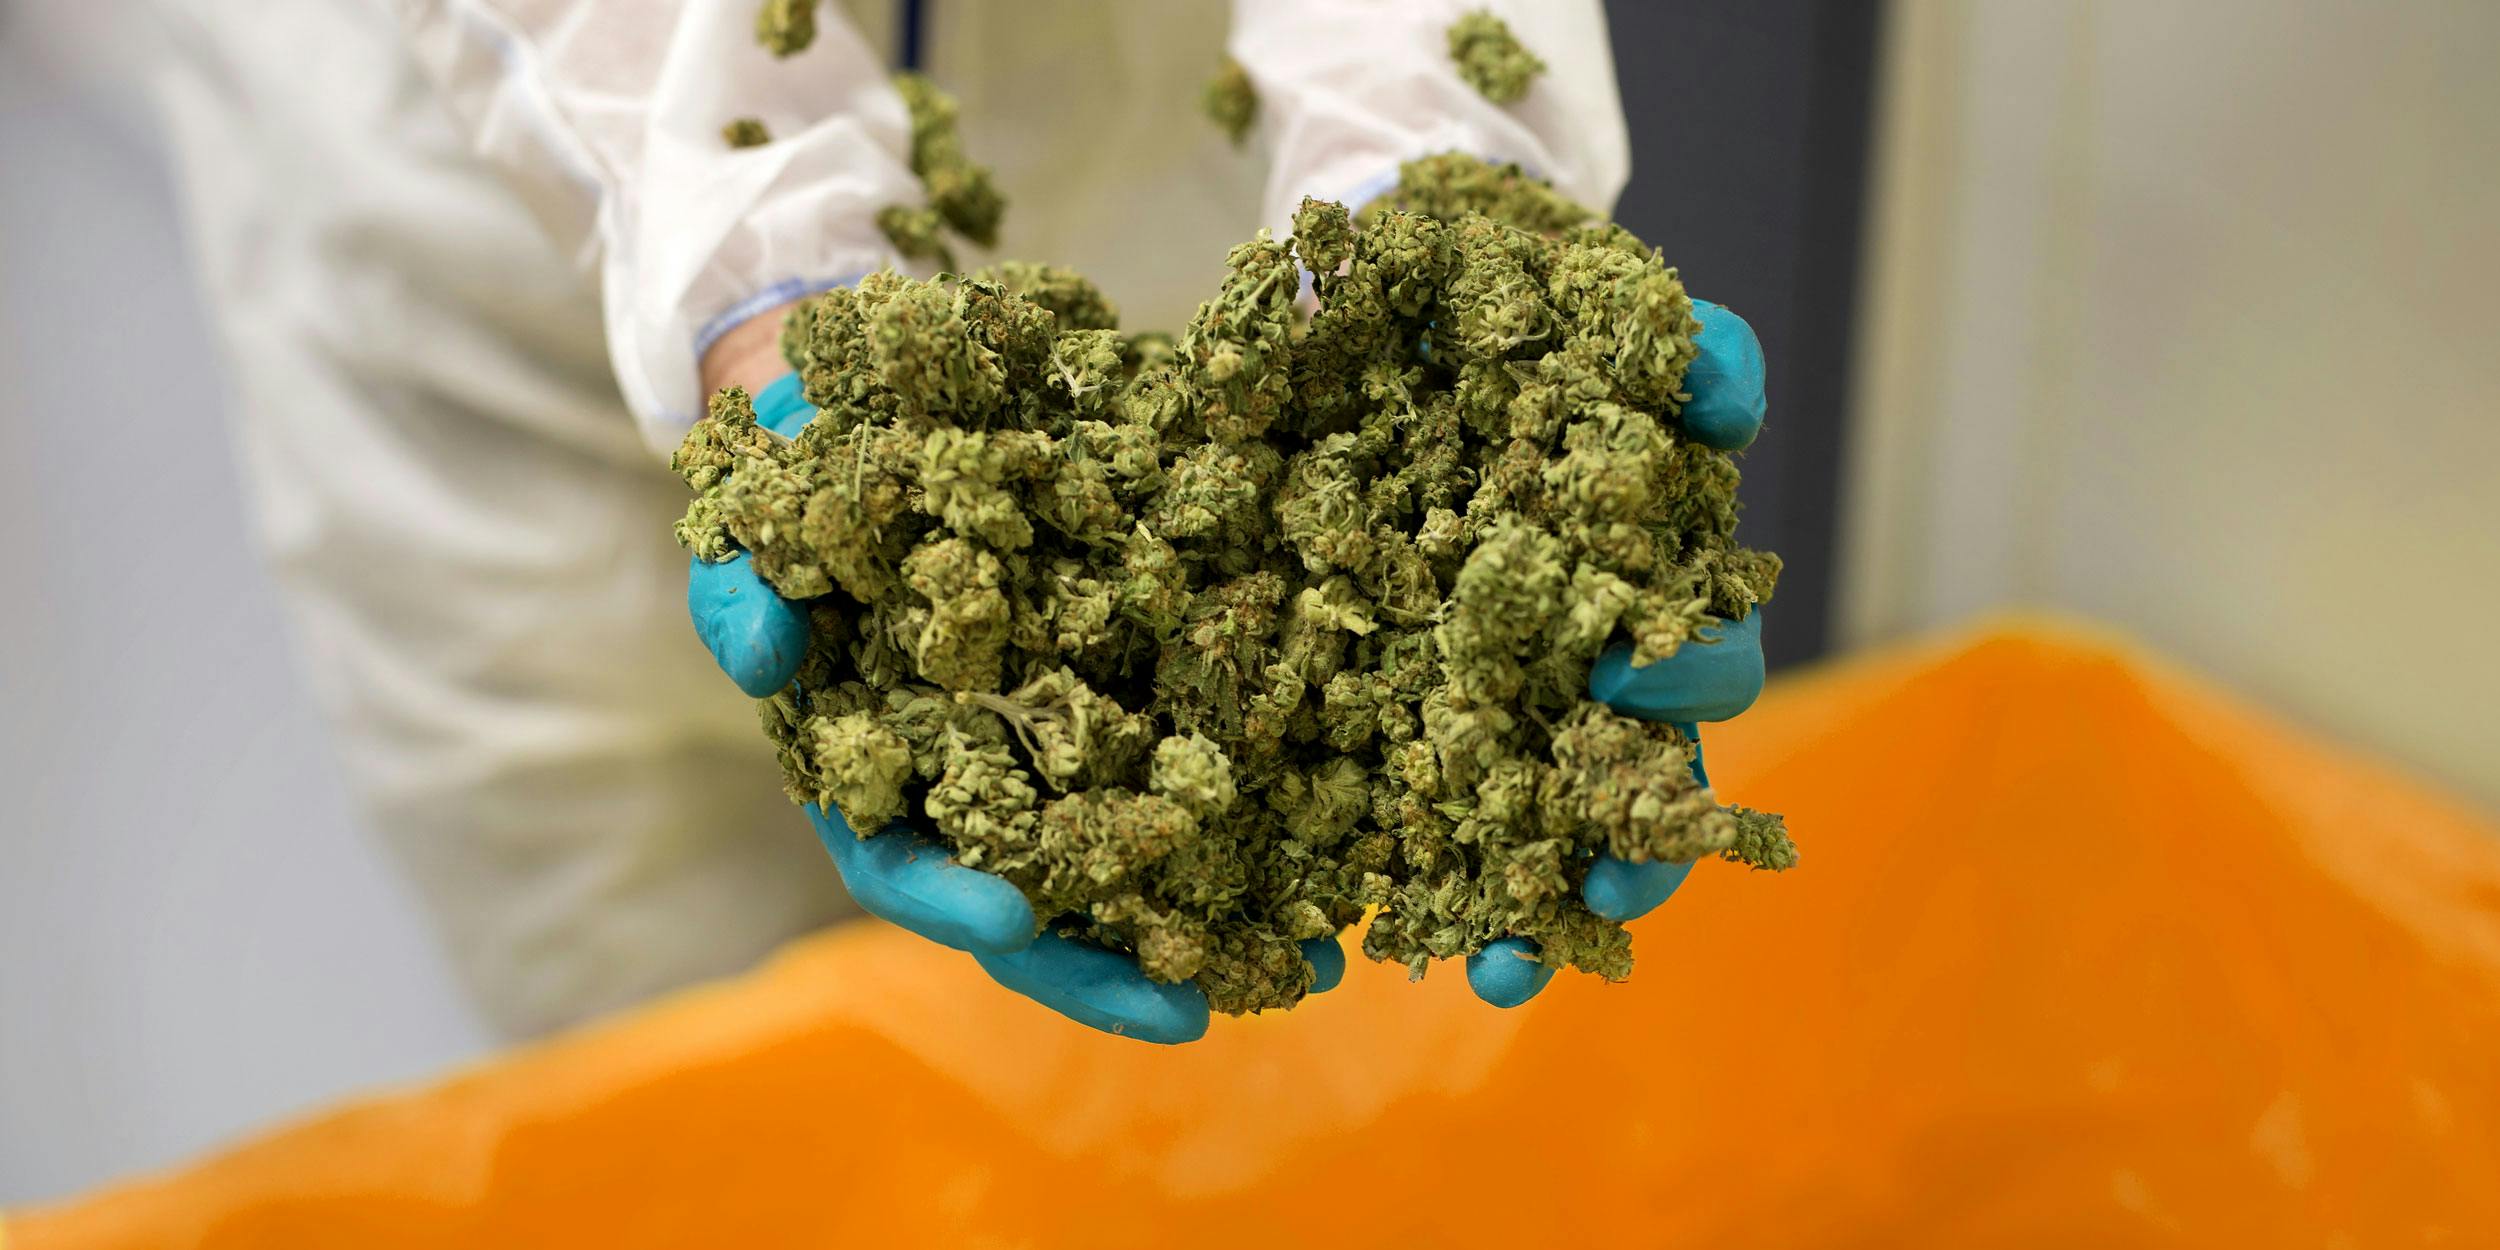 In this photo, an employee displays cannabis buds for a photograph at the CannTrust Holding Inc. Niagara Perpetual Harvest facility in Pelham, Ontario, Canada, on Wednesday, July 11, 2018. Legalization in Canada is set to go into effect on October 17th. British Columbia dispensaries are concerned they won't have enough weed to stock their shelves by then.